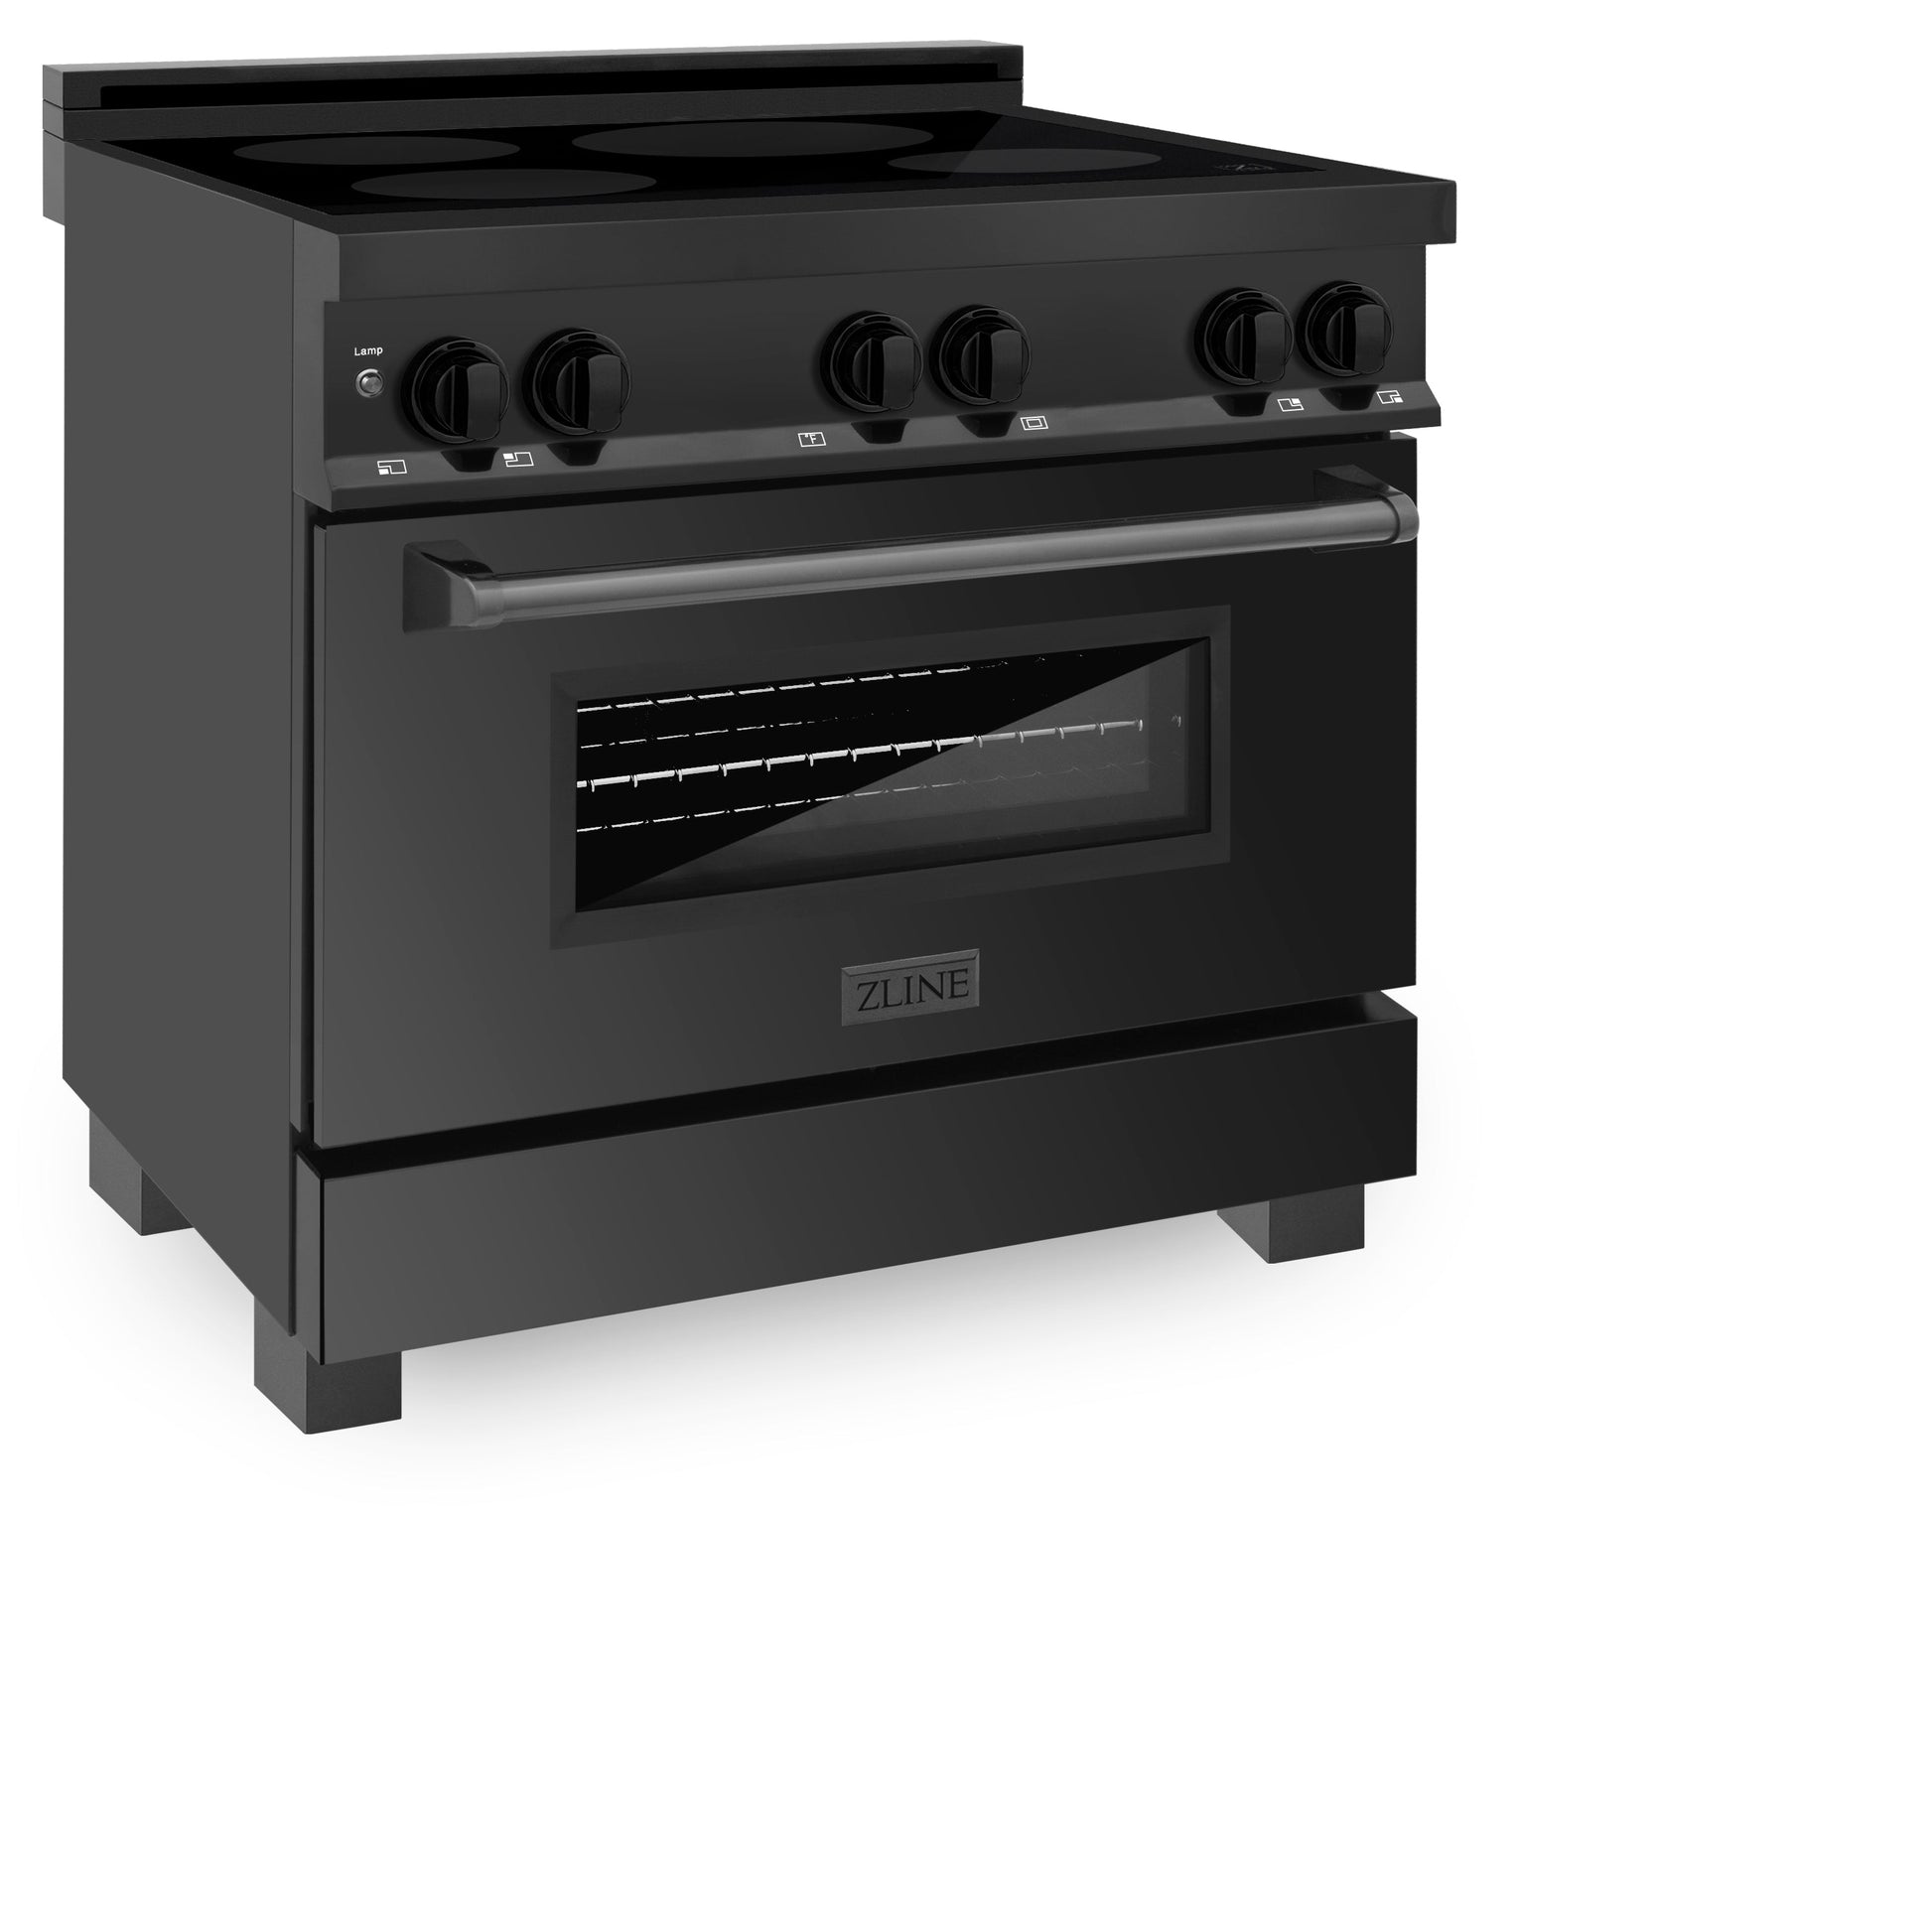 ZLINE 36 in. 4.6 cu. ft. Induction Range with a 4 Element Stove and Electric Oven in Black Stainless Steel (RAIND-BS-36) side, oven door closed.